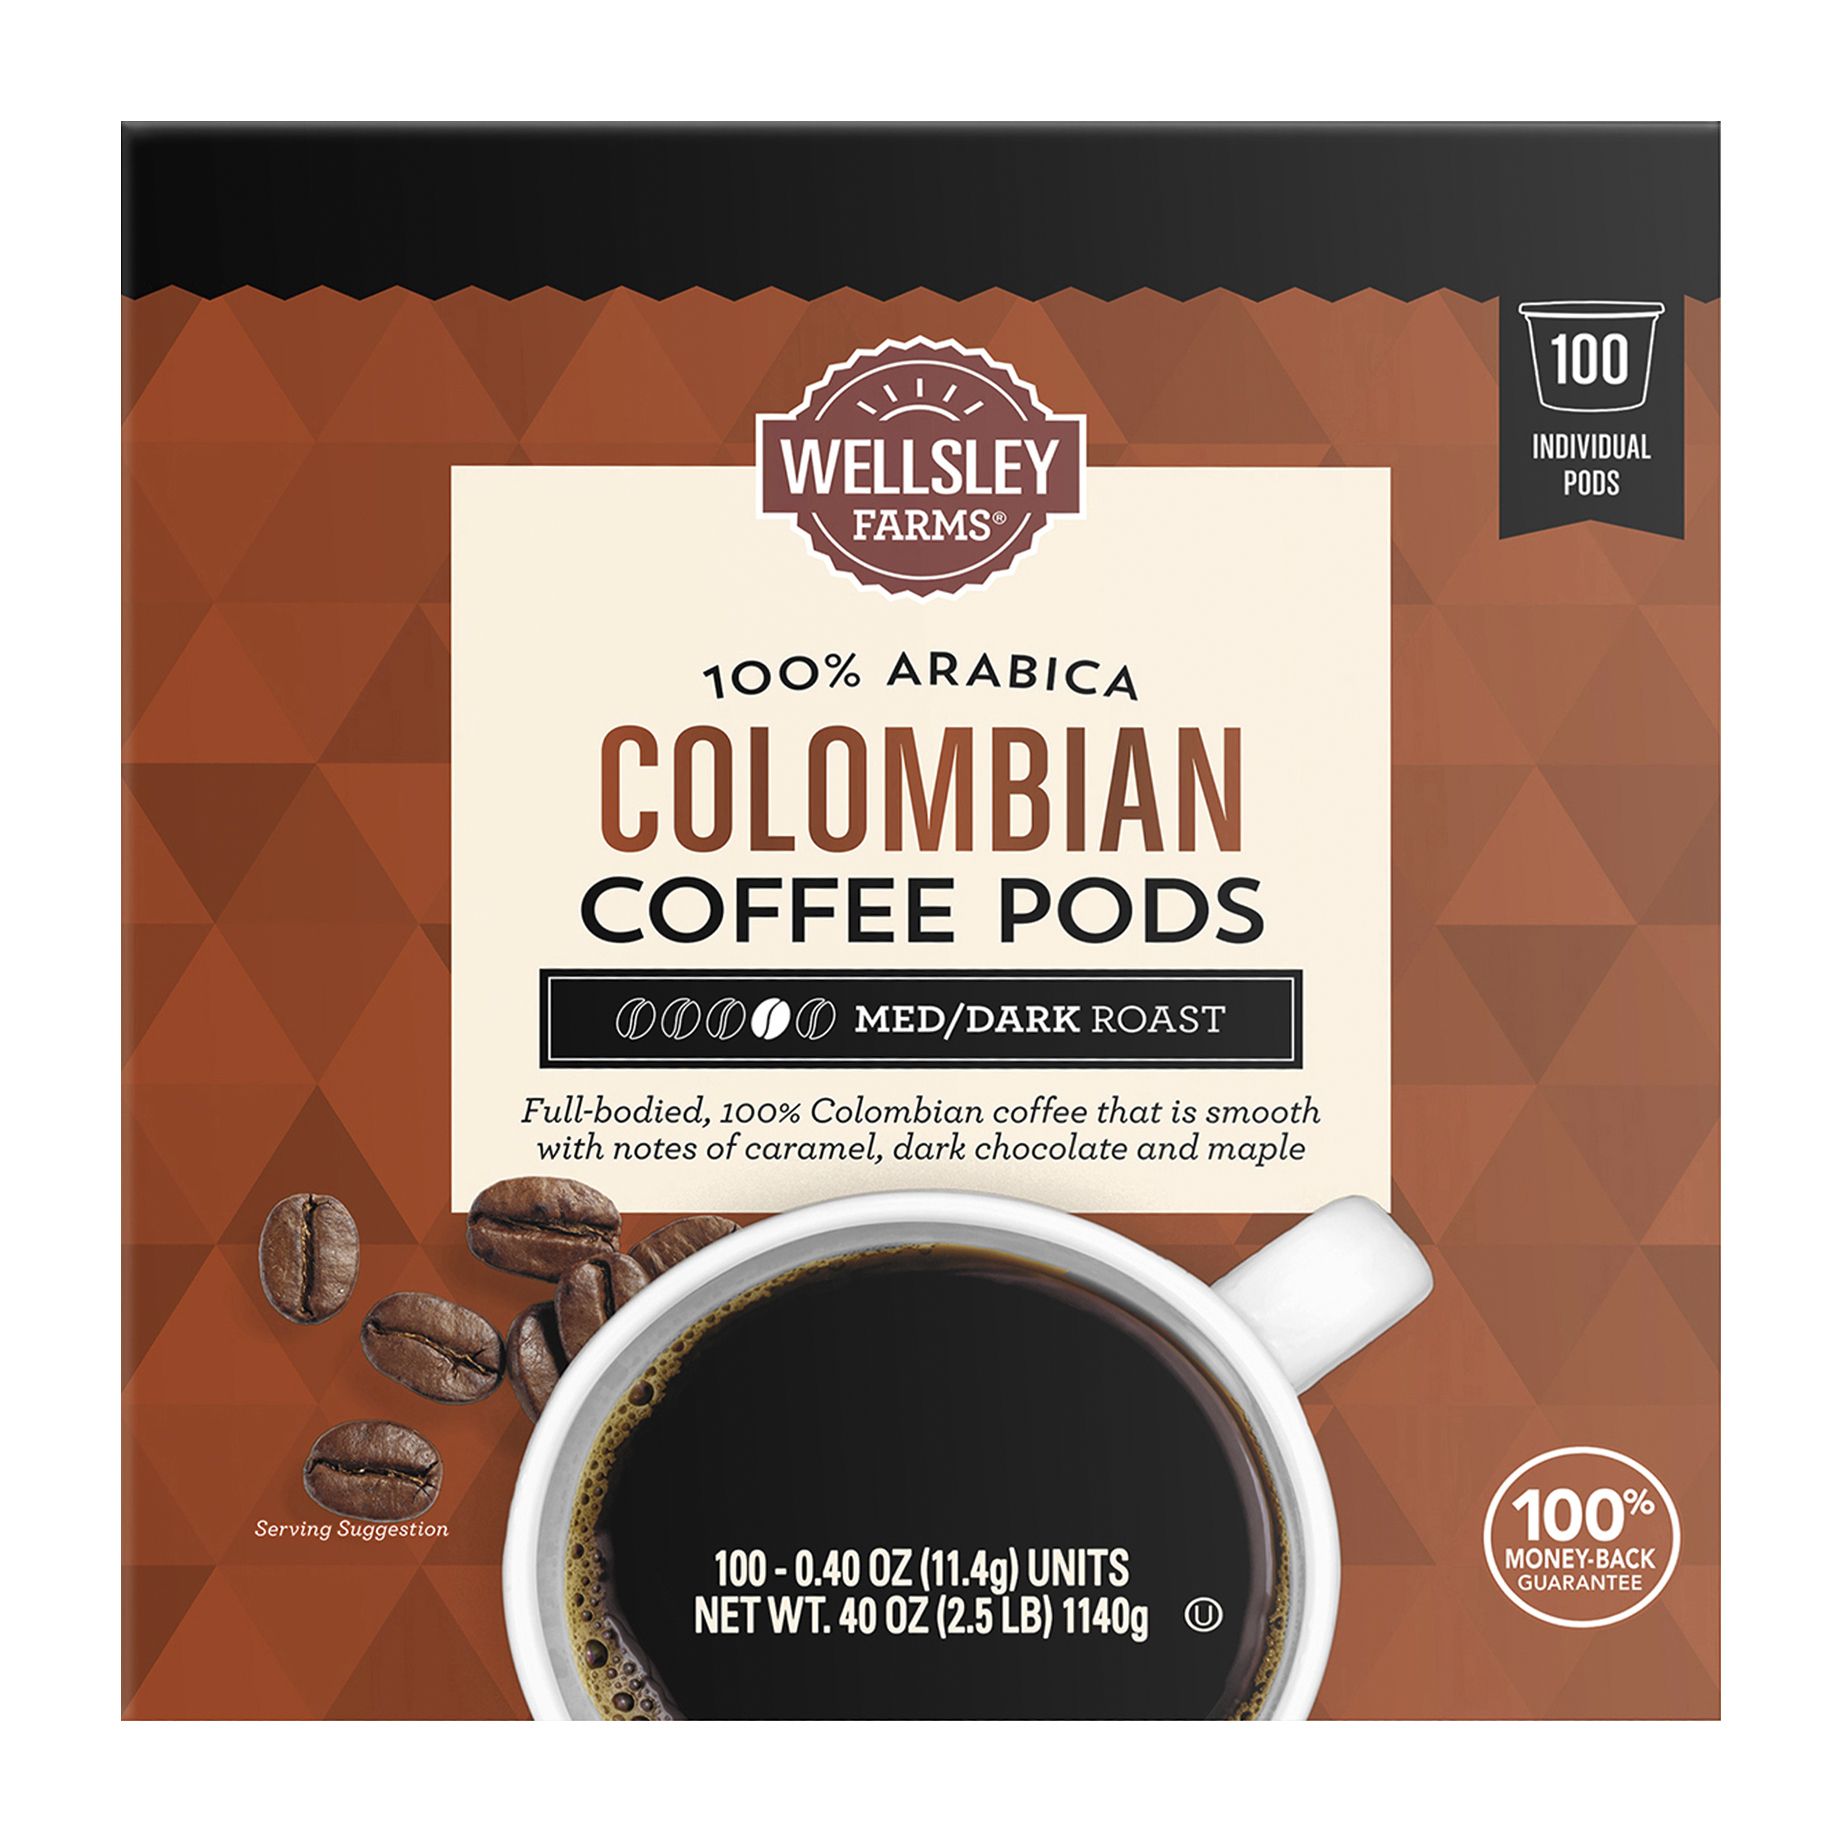 Wellsley Farms 100% Colombian Coffee Pods, 100 ct. | BJ's